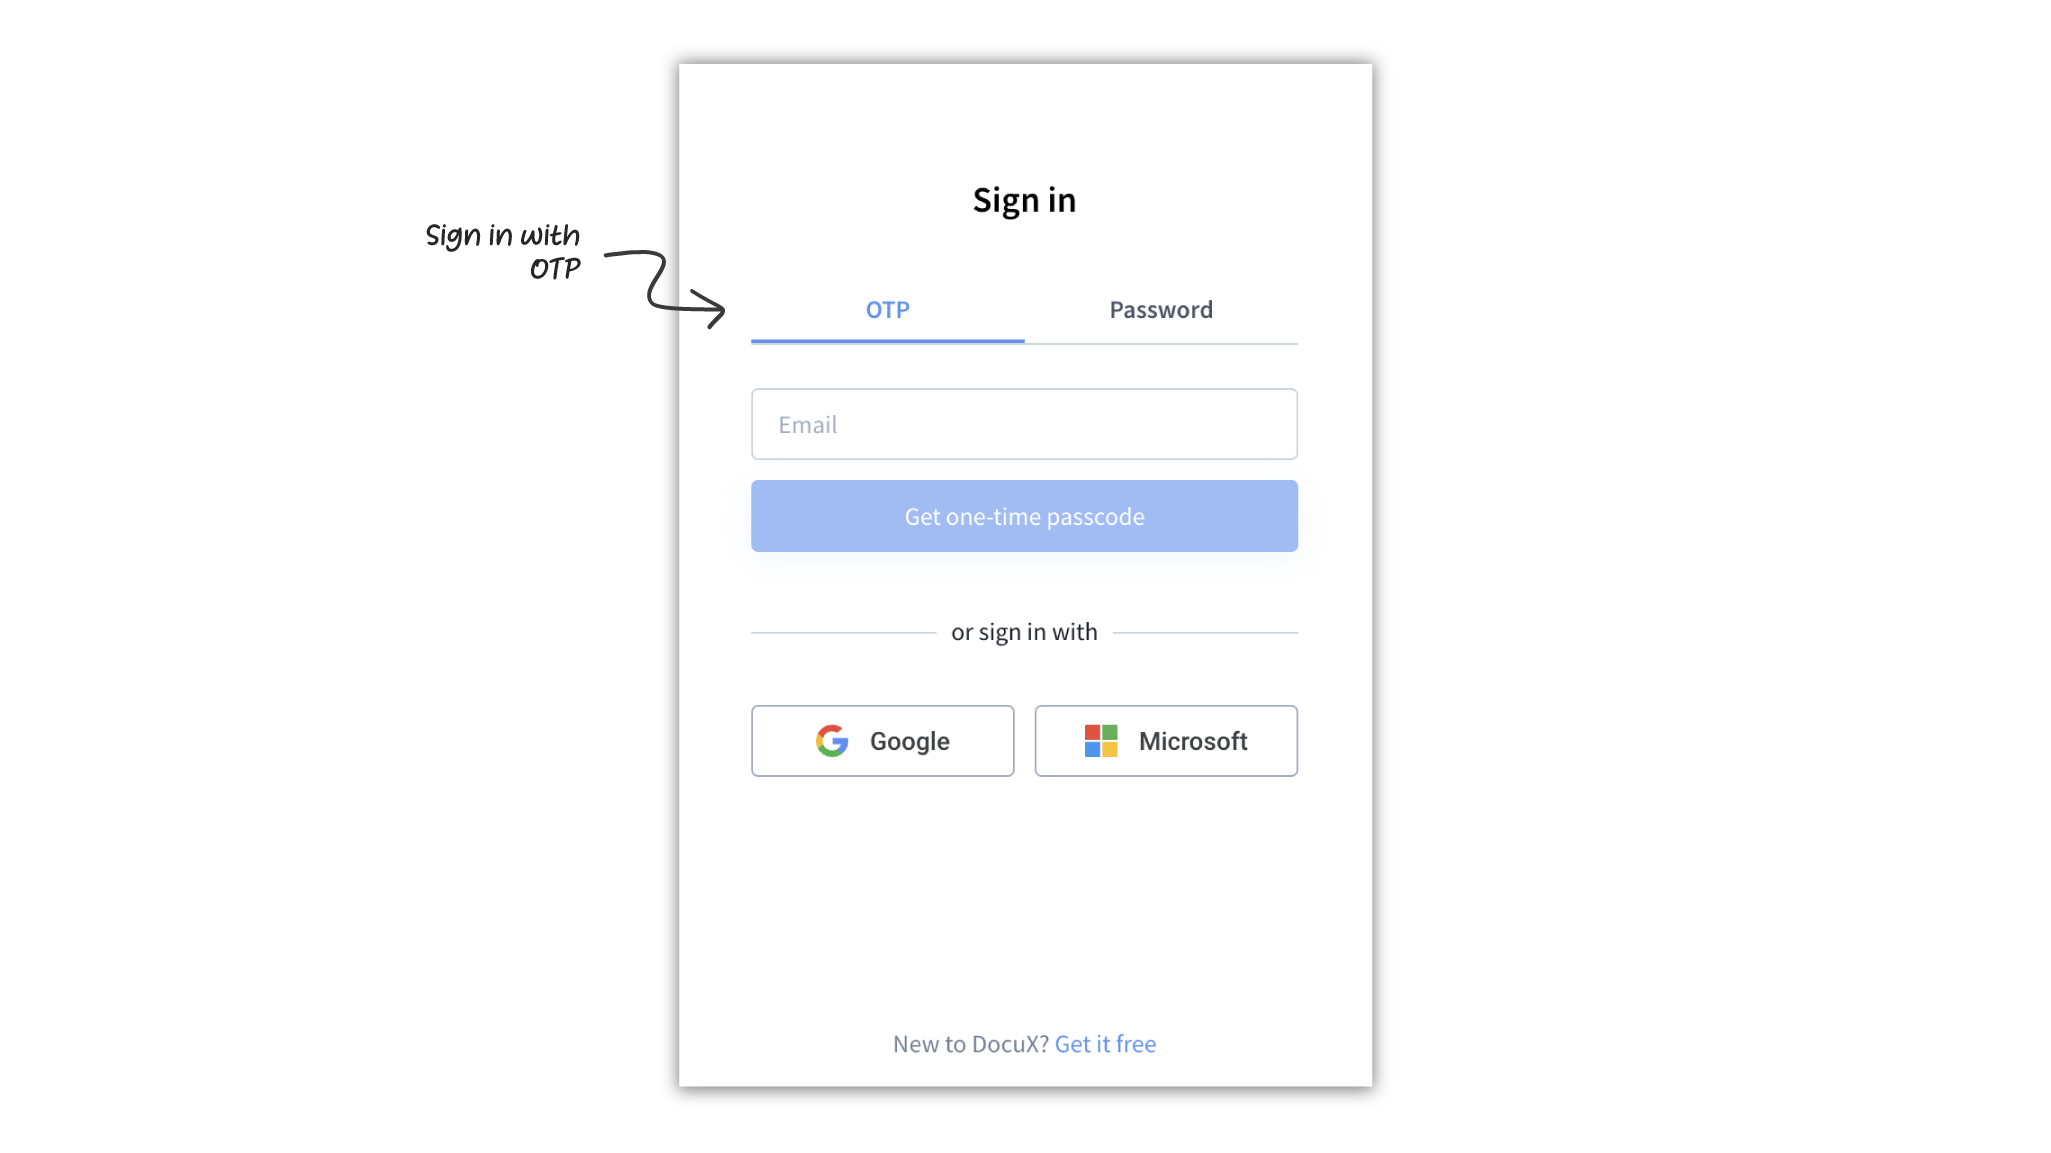 Sign in with OTP